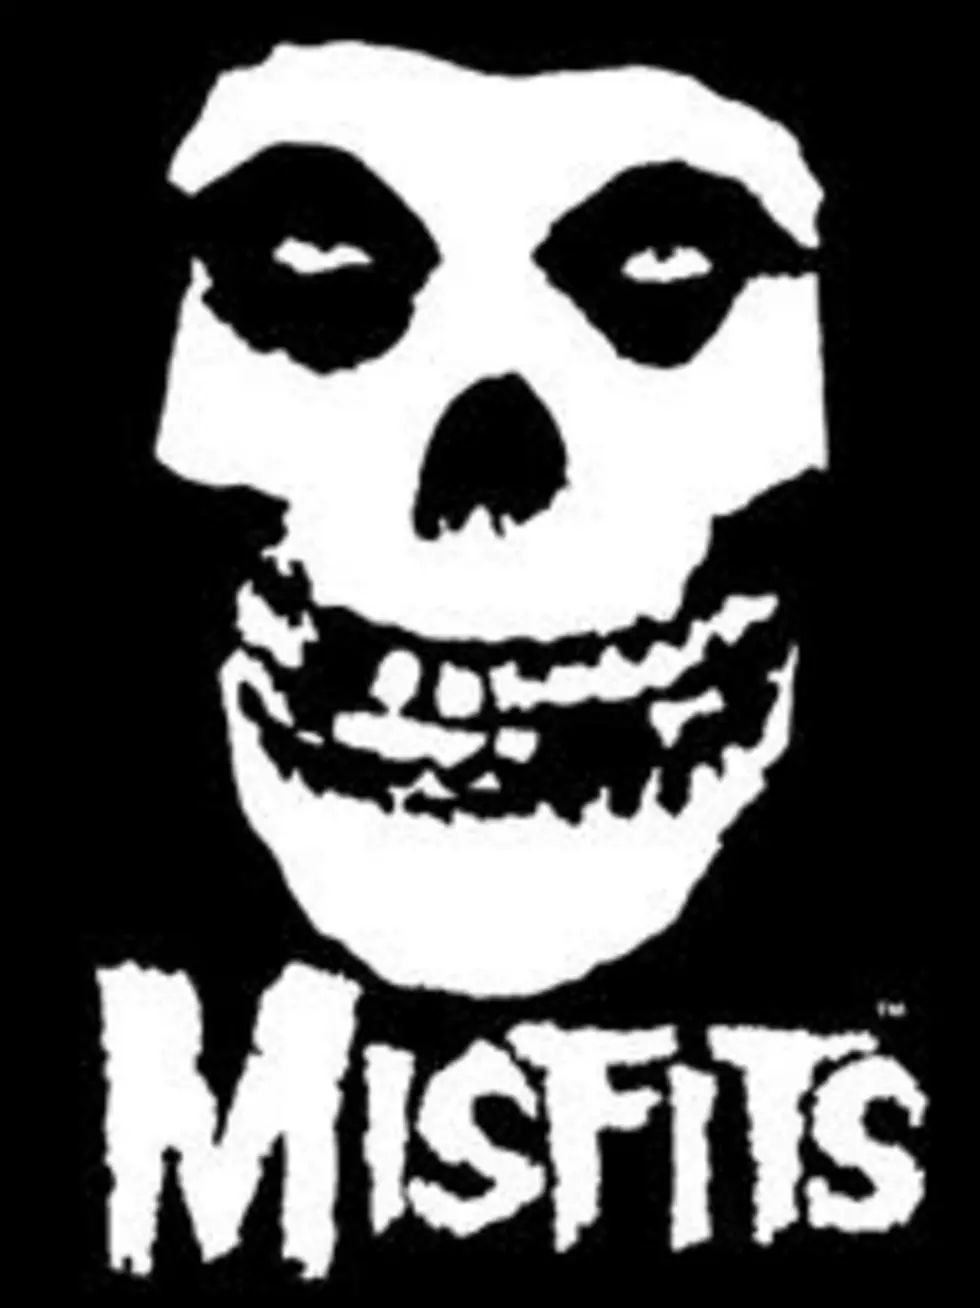 The Misfits Return With First Album in A Decade and Fall Tour